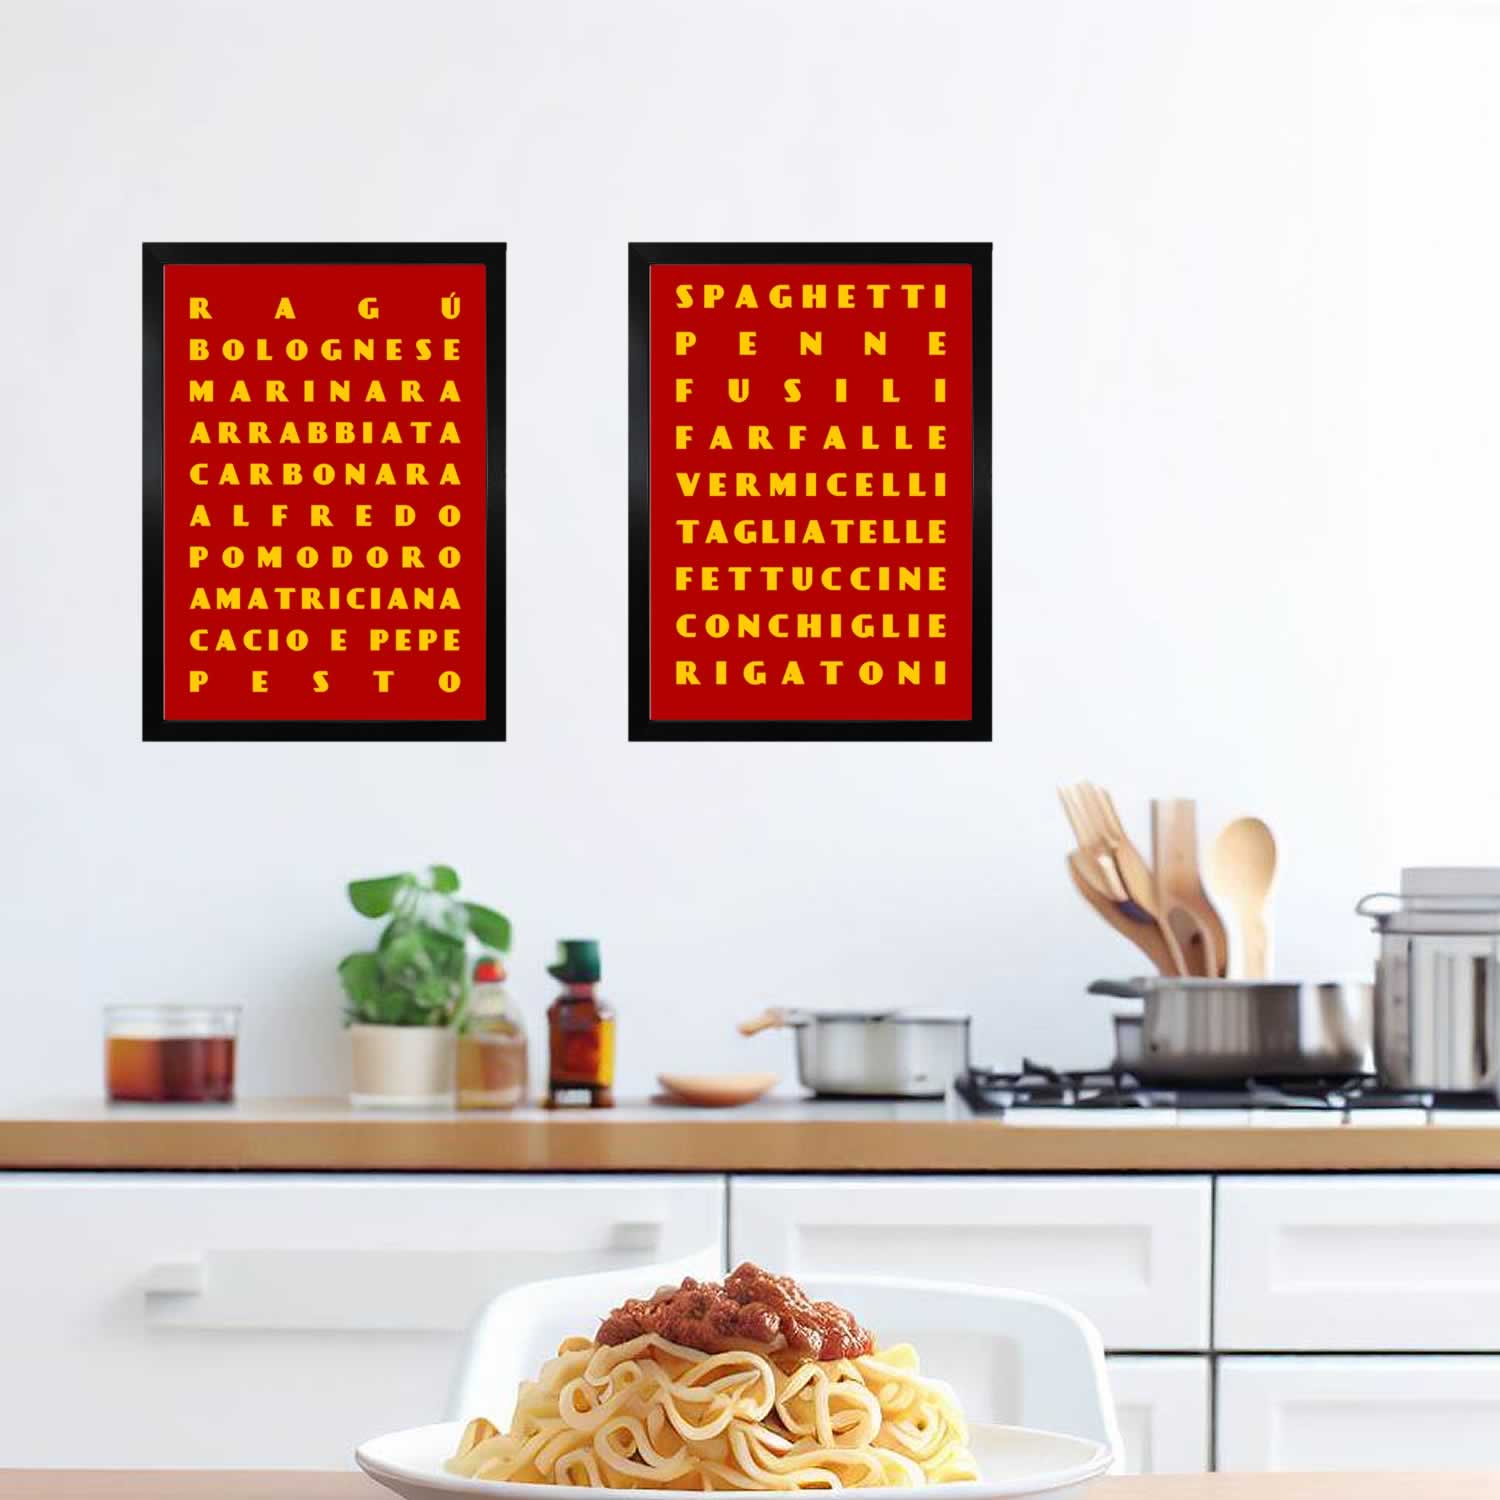 Pasta Sauces And Pasta Shapes Print In Kitchen